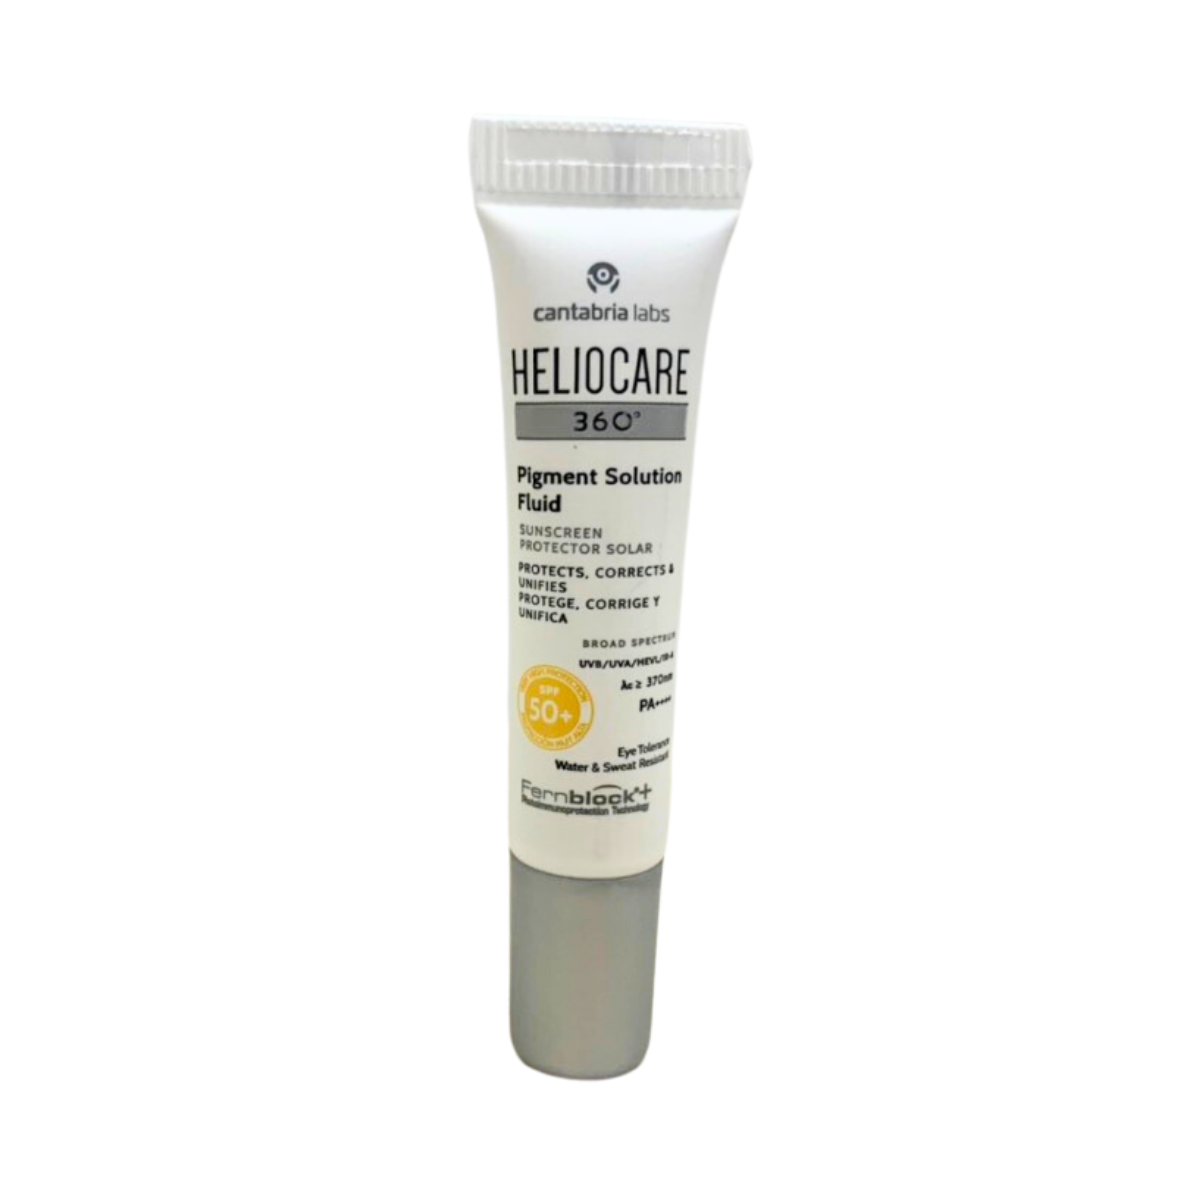 [HB GIFT]Kem chống nắng ngừa nám Heliocare 360° Pigment Solution Fluid SPF50 3ml